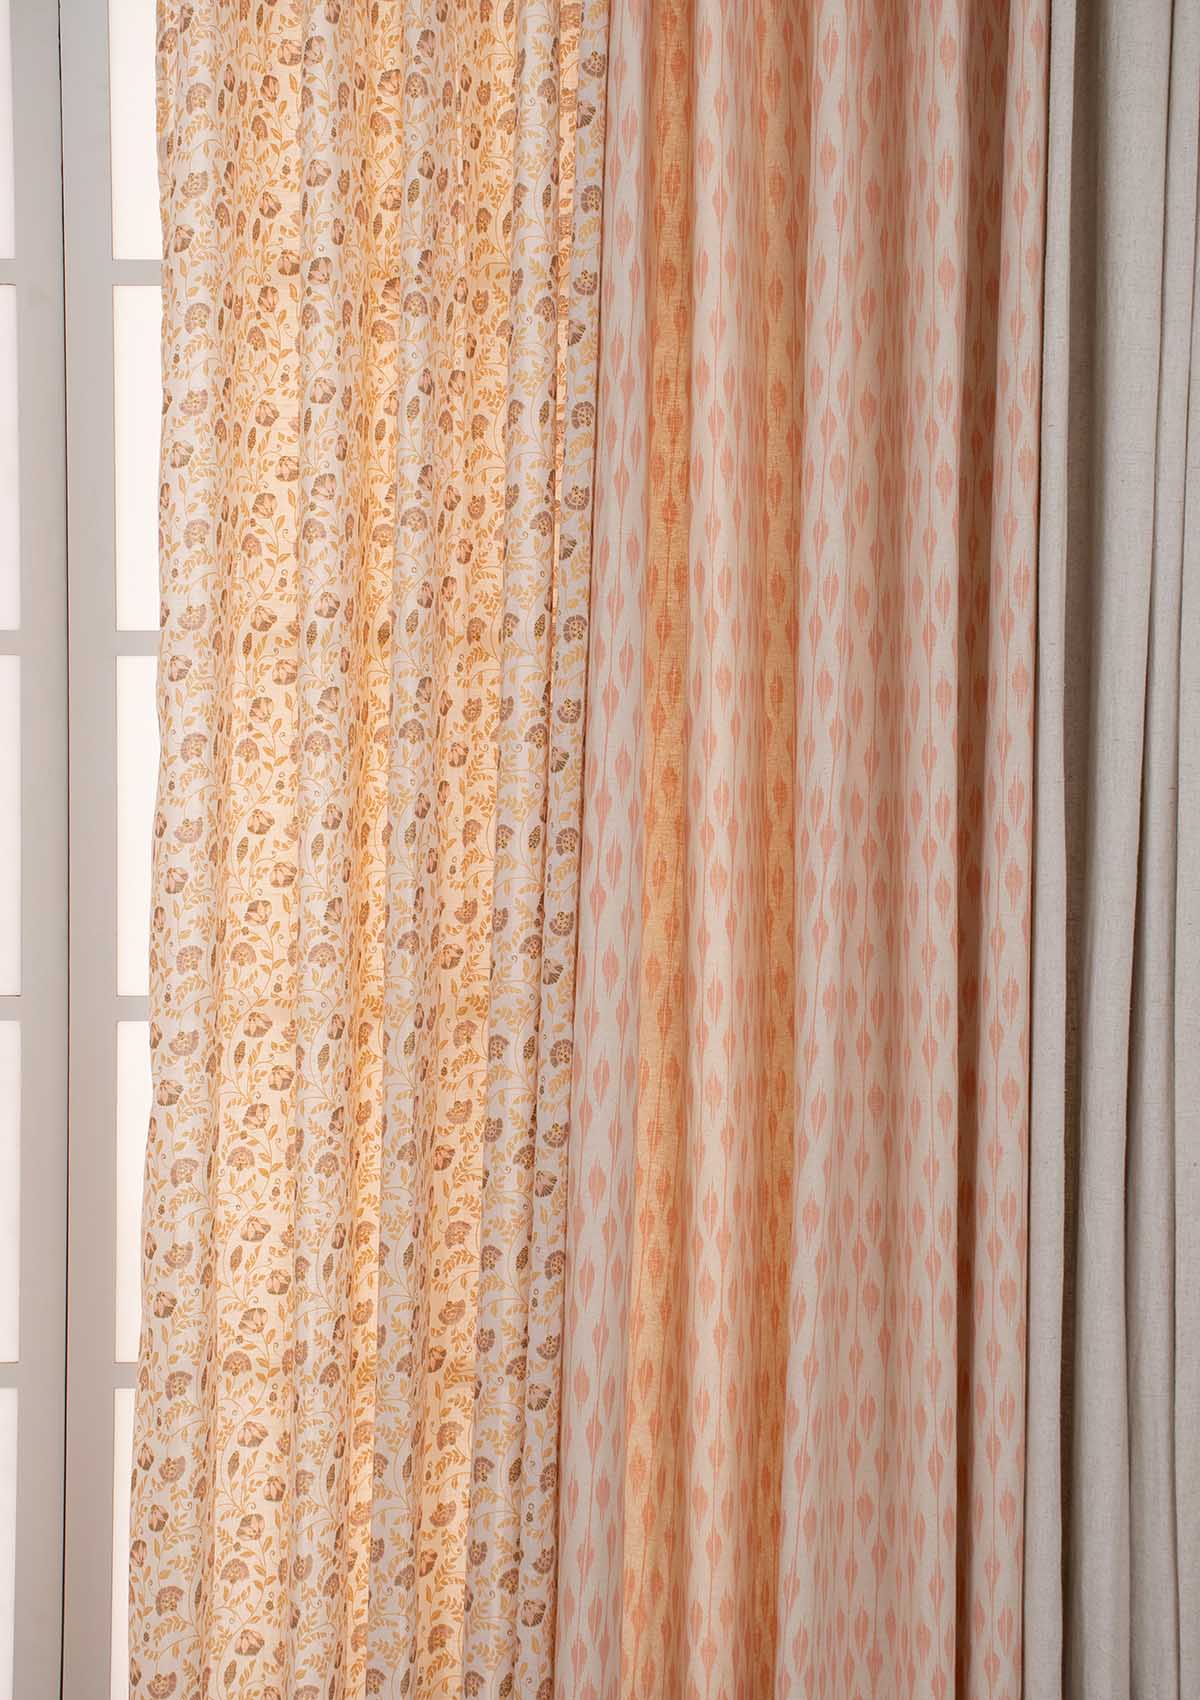 Calico with chenab Set of 6 Combo Cotton Curtain  - Beige